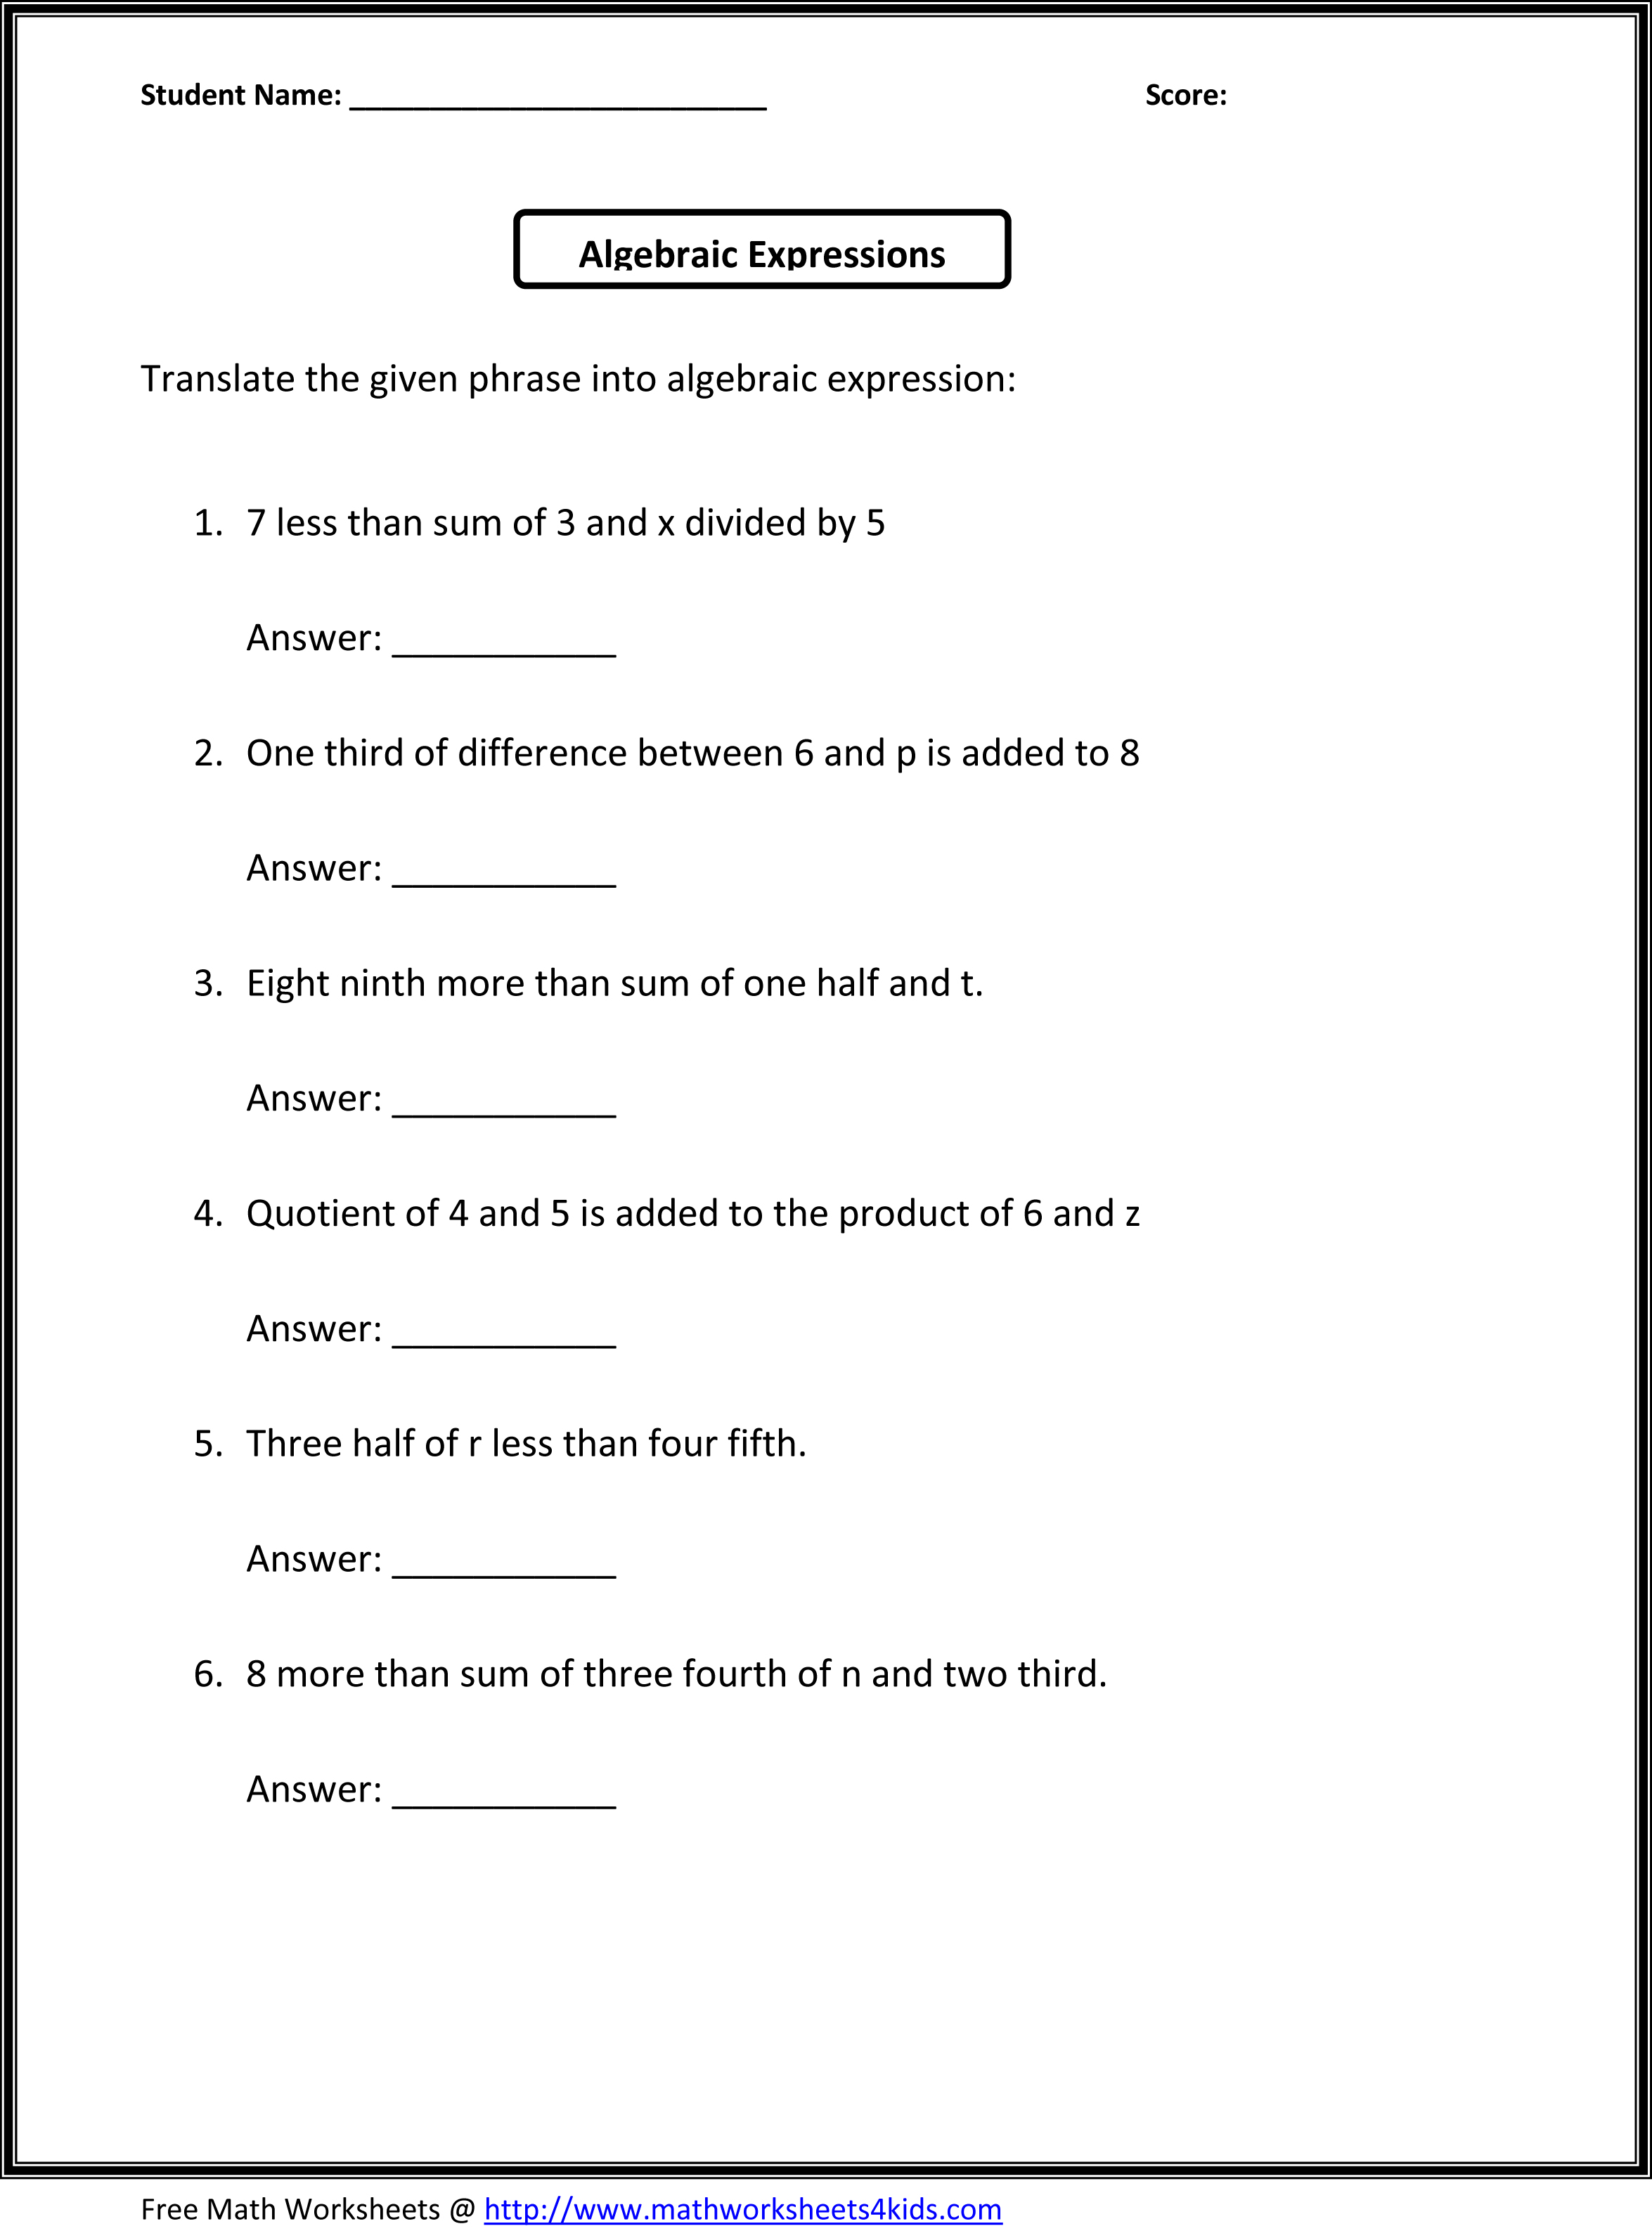 Free Math Worksheets For 6Th Grade Exponents